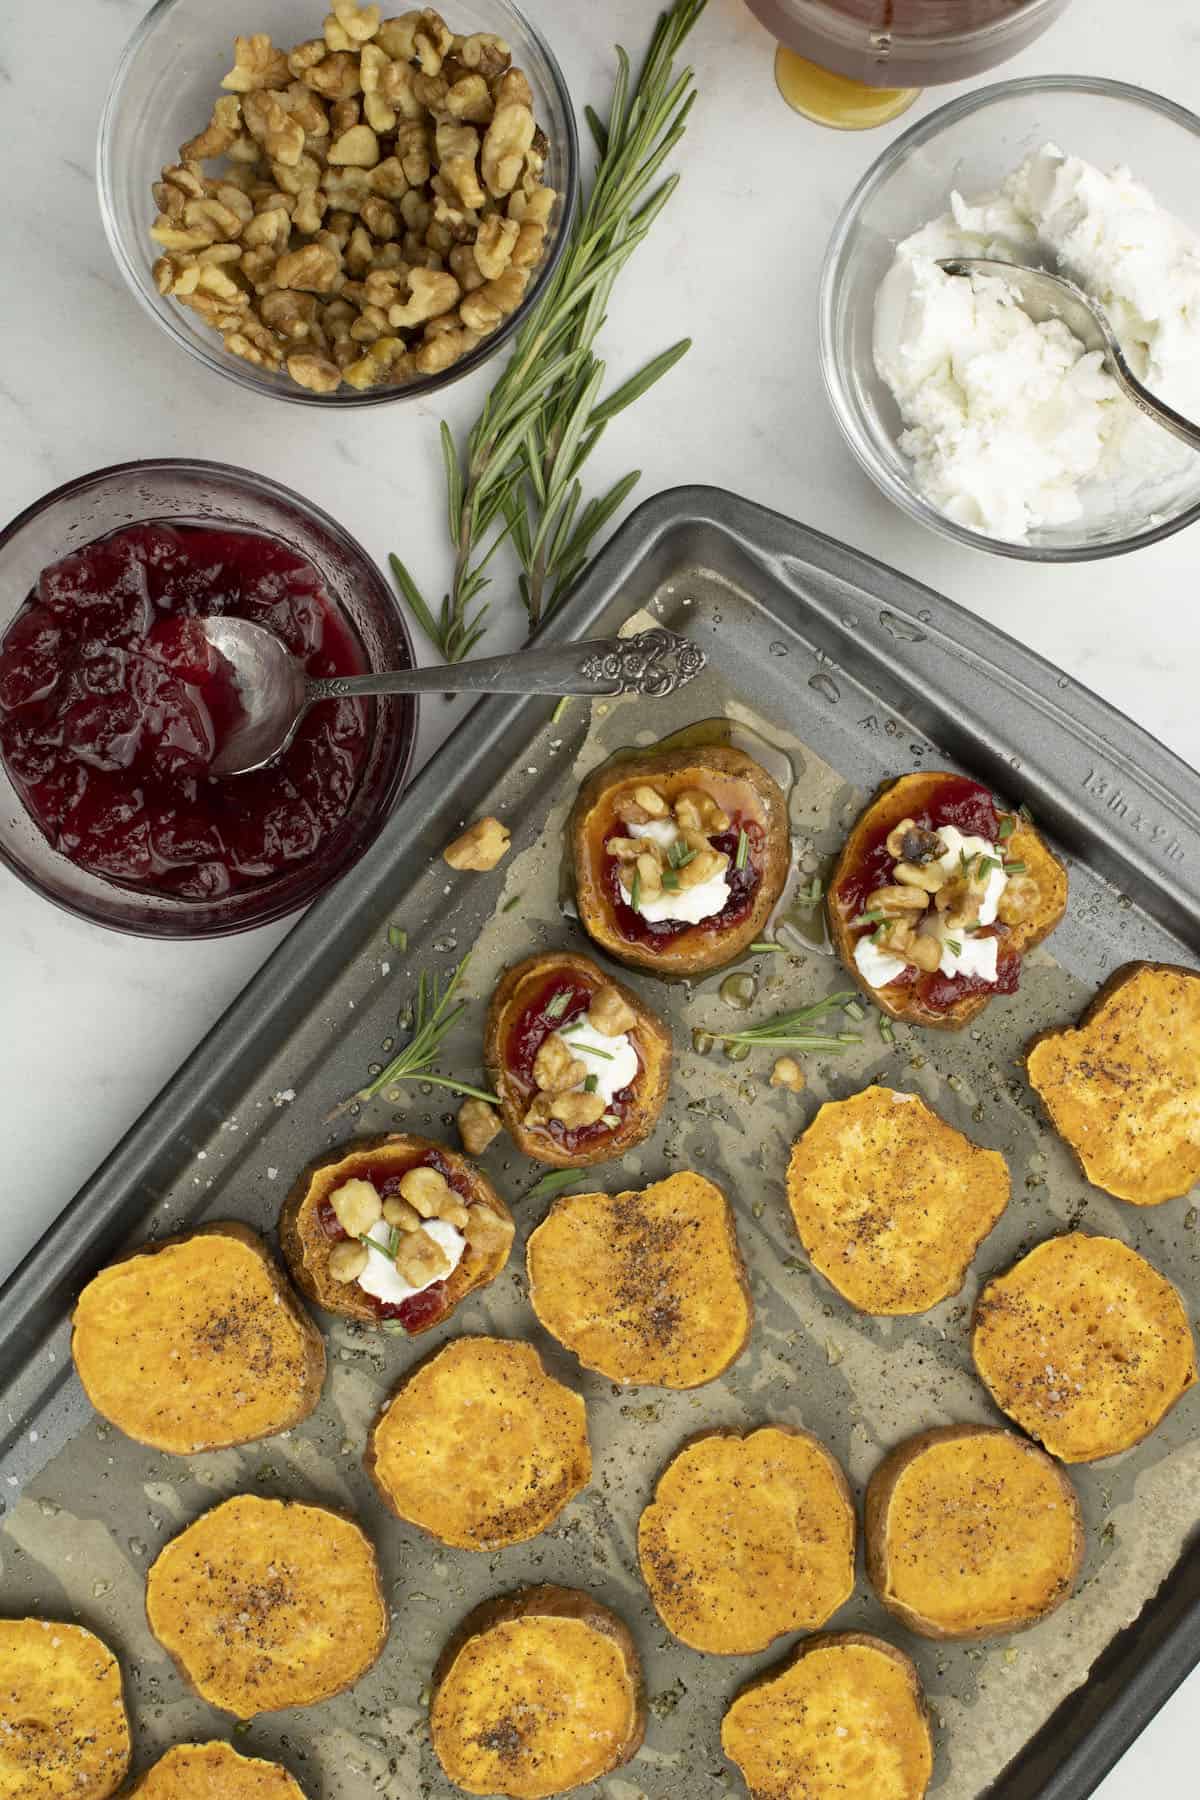 Sweet potato slices topped with cranberries, walnuts, goat cheese, honey, and rosemary on a baking sheet.